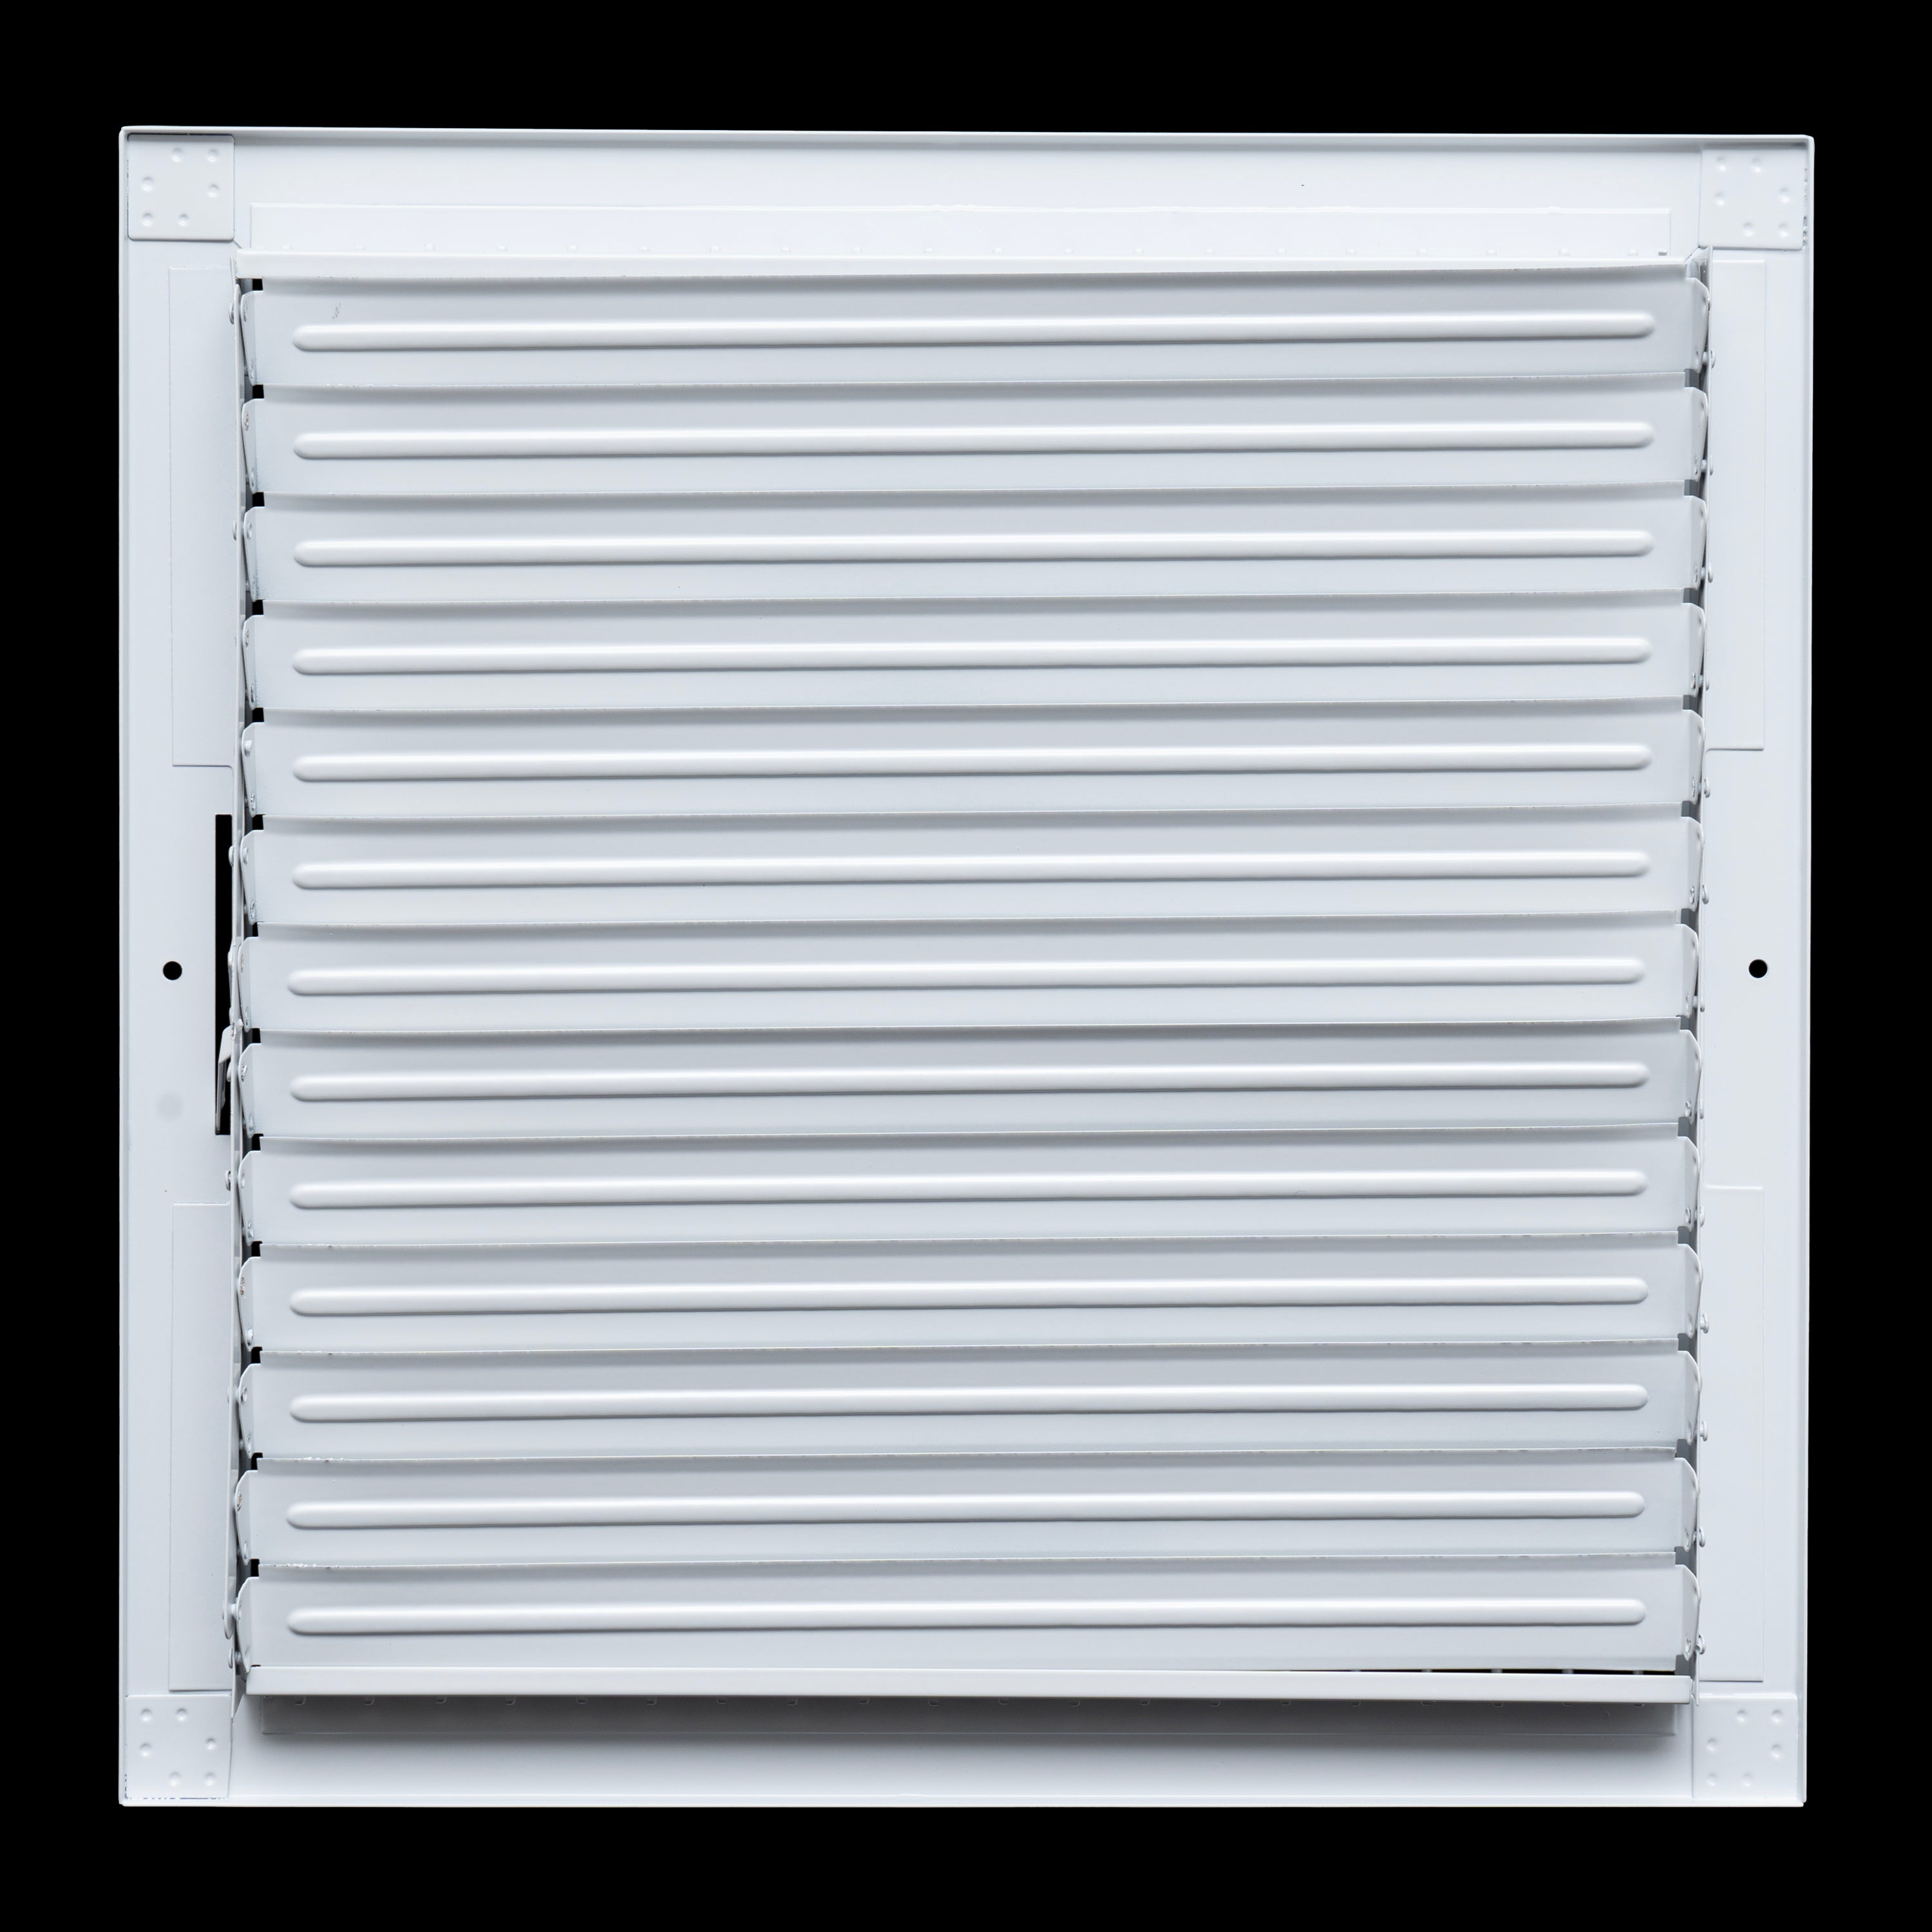 14"W x 14"H  Steel Adjustable Air Supply Grille | Register Vent Cover Grill for Sidewall and Ceiling | White | Outer Dimensions: 15.75"W X 15.75"H for 14x14 Duct Opening